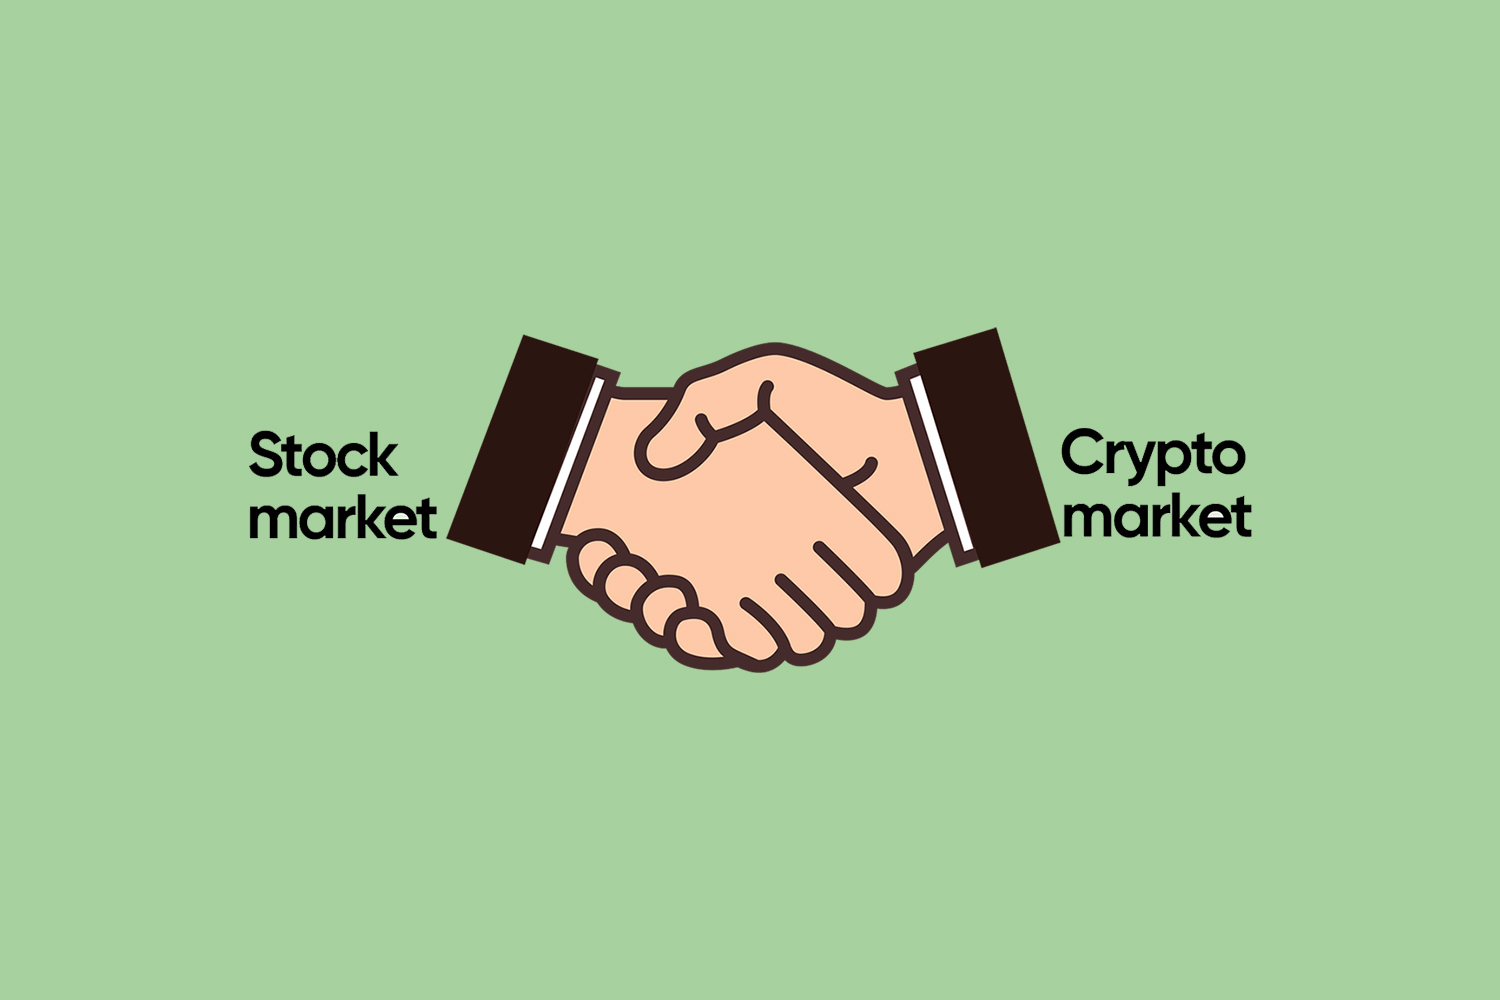 Is there a relationship between the trend in the stock market & crypto market?